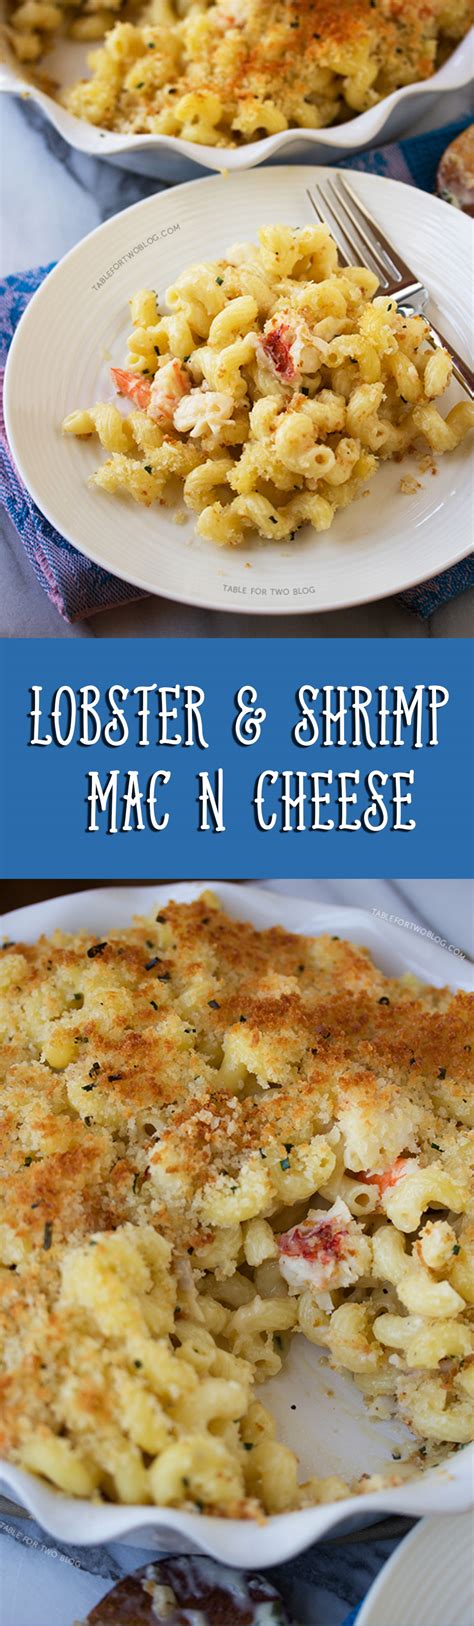 Lobster And Shrimp Mac N Cheese Table For Two By Julie Chiou